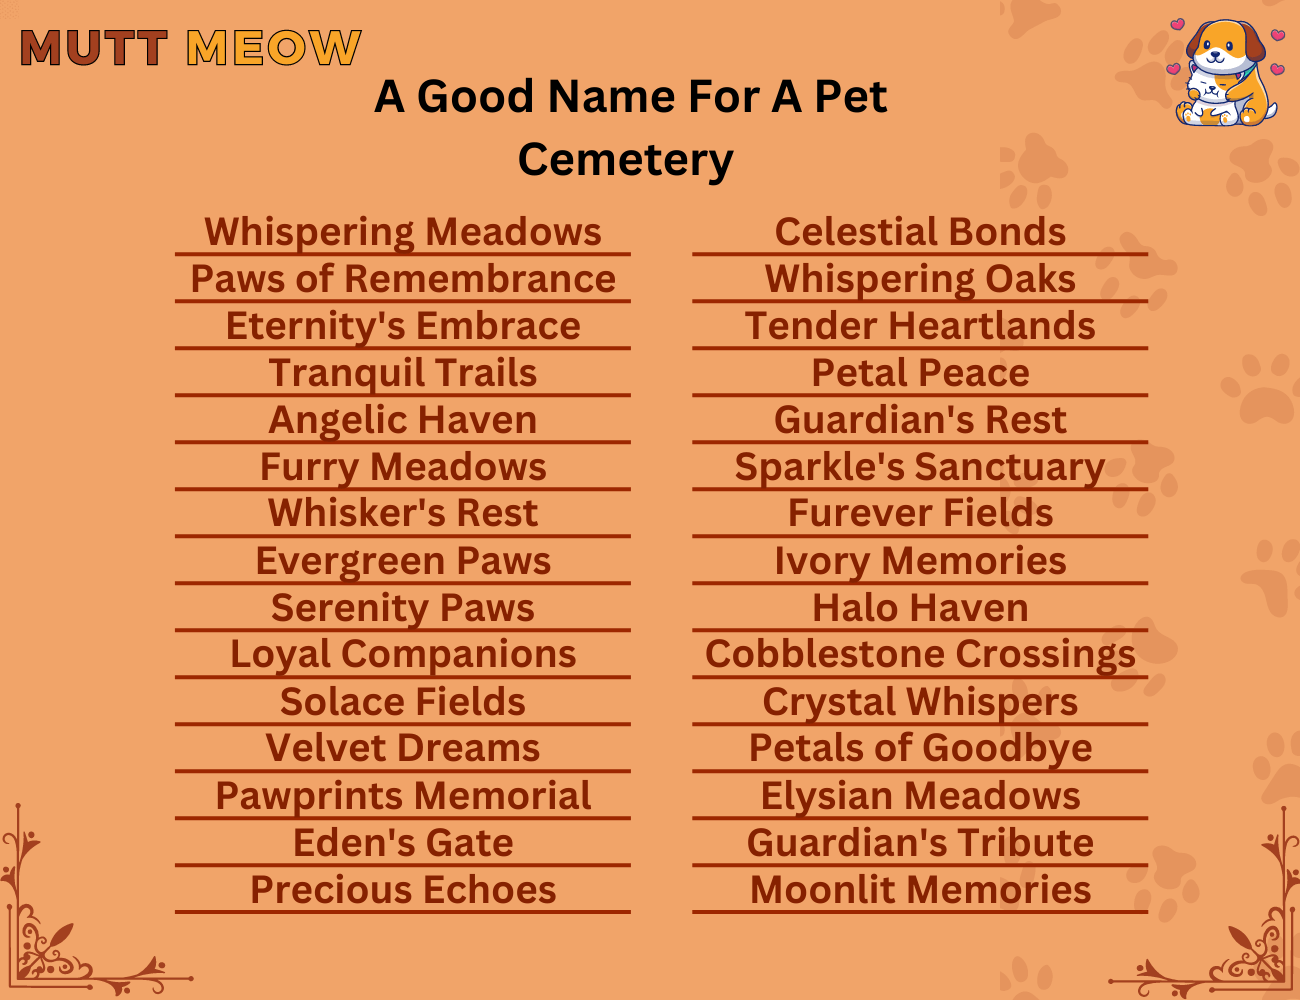 A Good Name For A Pet Cemetery